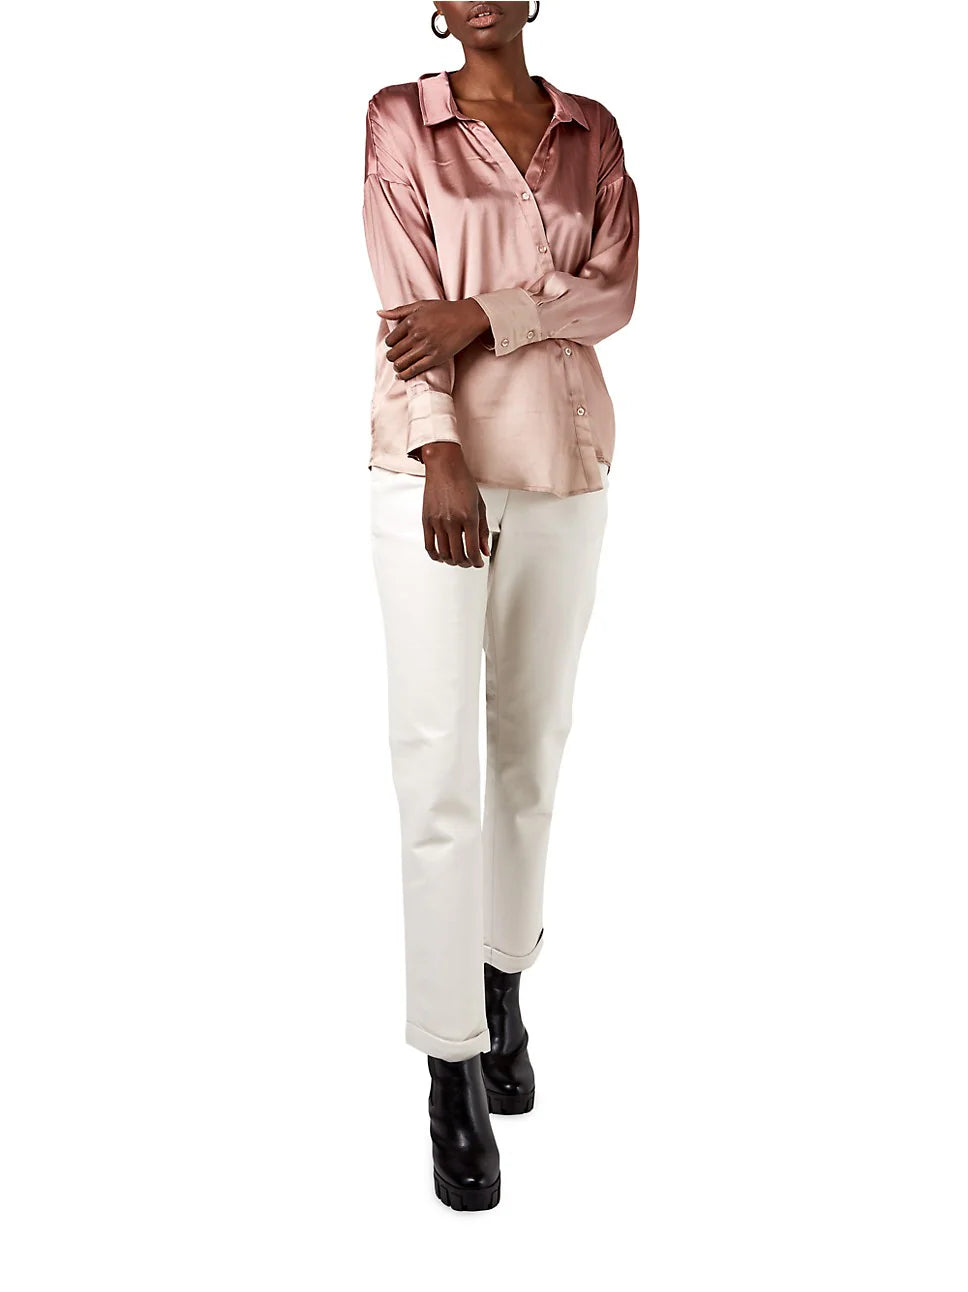 Zoom Out Body picture of a model using the ASbyDF Tramonto Blouse Mauve - CT Grace